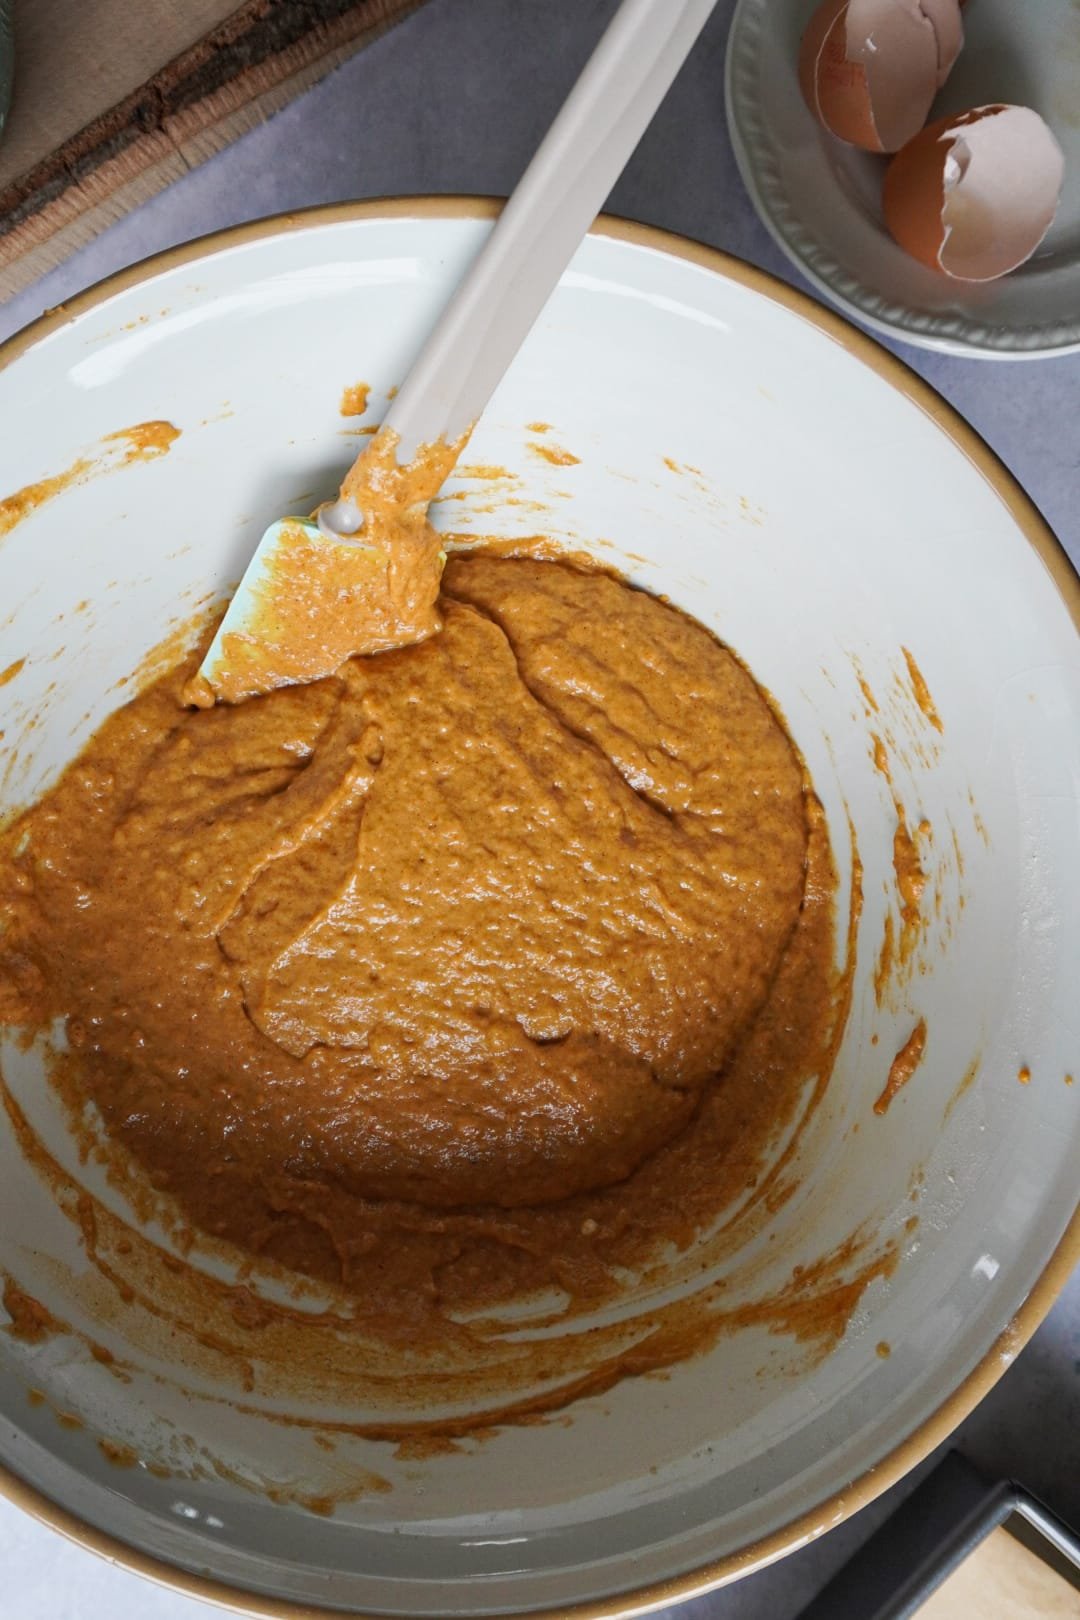 First, mix all your wet ingredients in a bowl.  Start with the sugar and eggs, mix them well together, then add the pumpkin puree and mix again.  